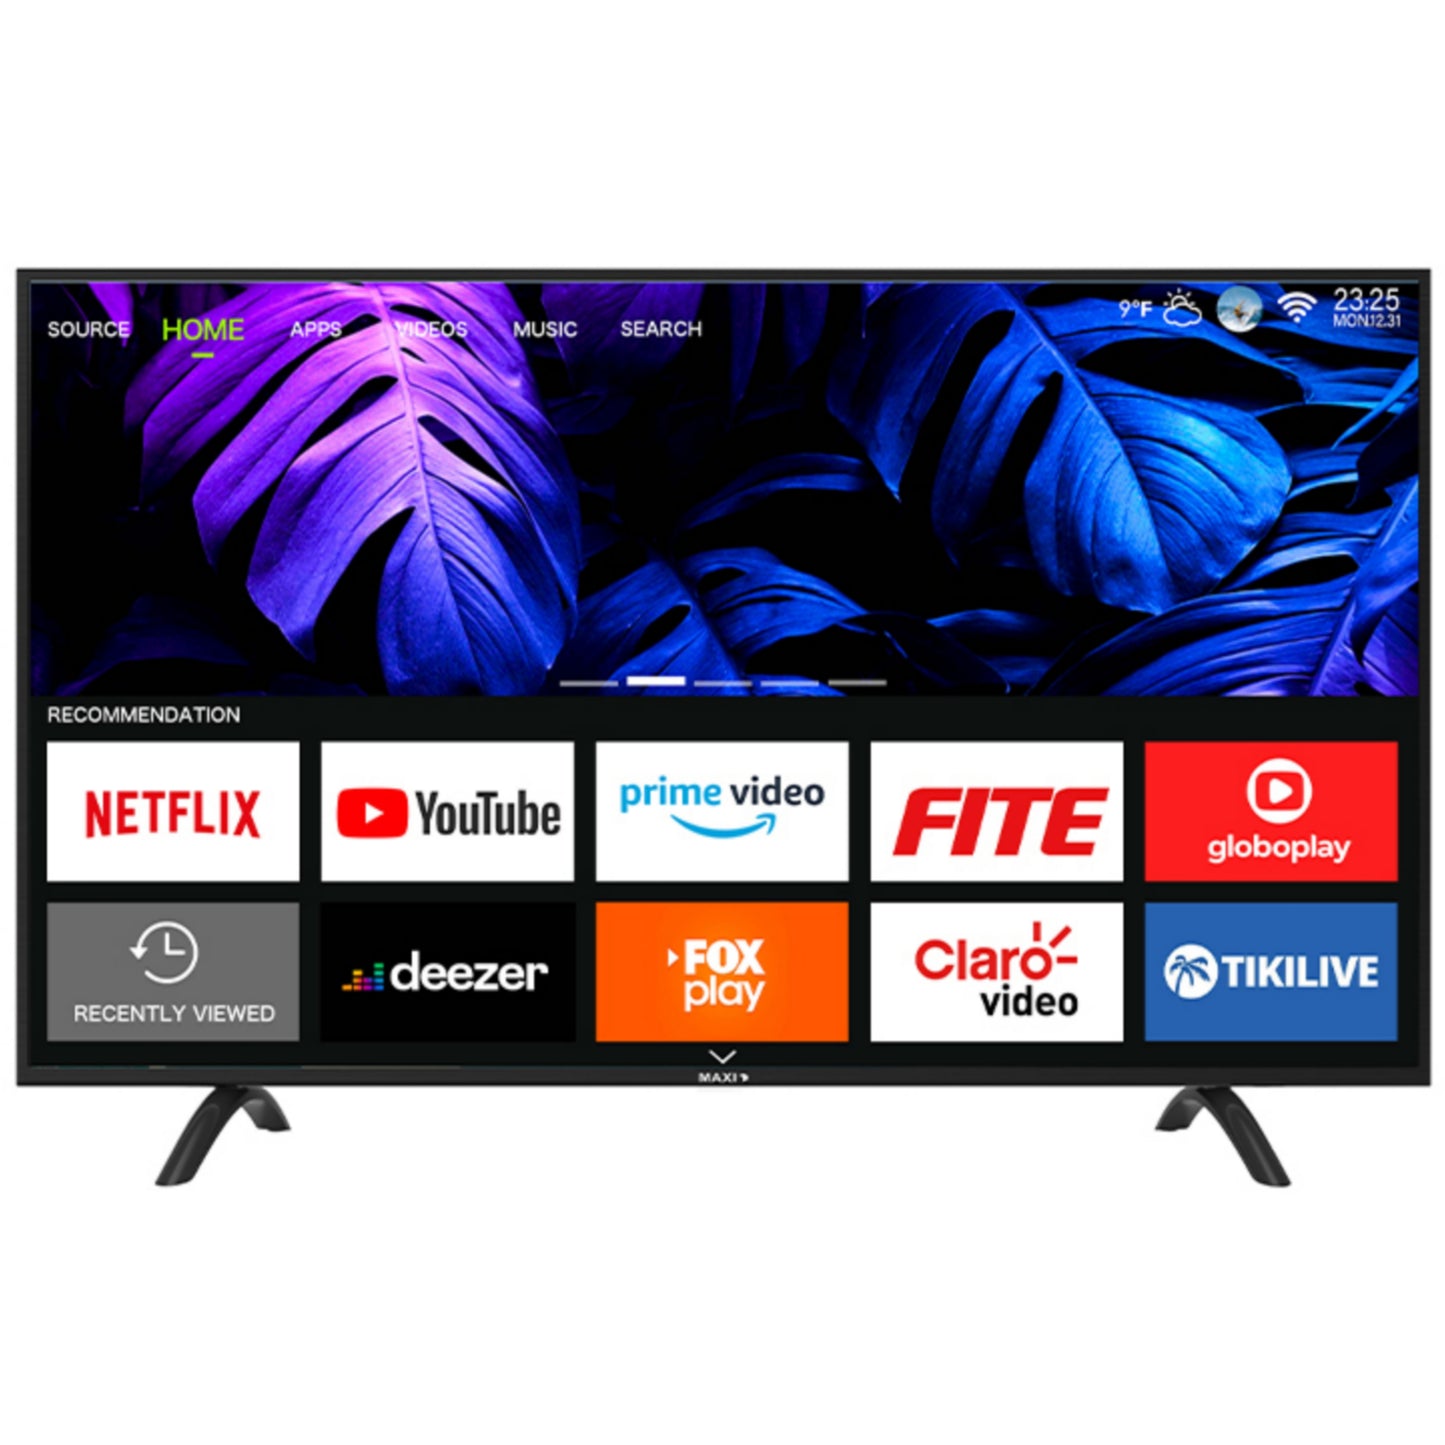 Maxi 55 Inch 55D2010S Smart 4K UHD LED TV + Built-in WiFi, Miracast - Brand New